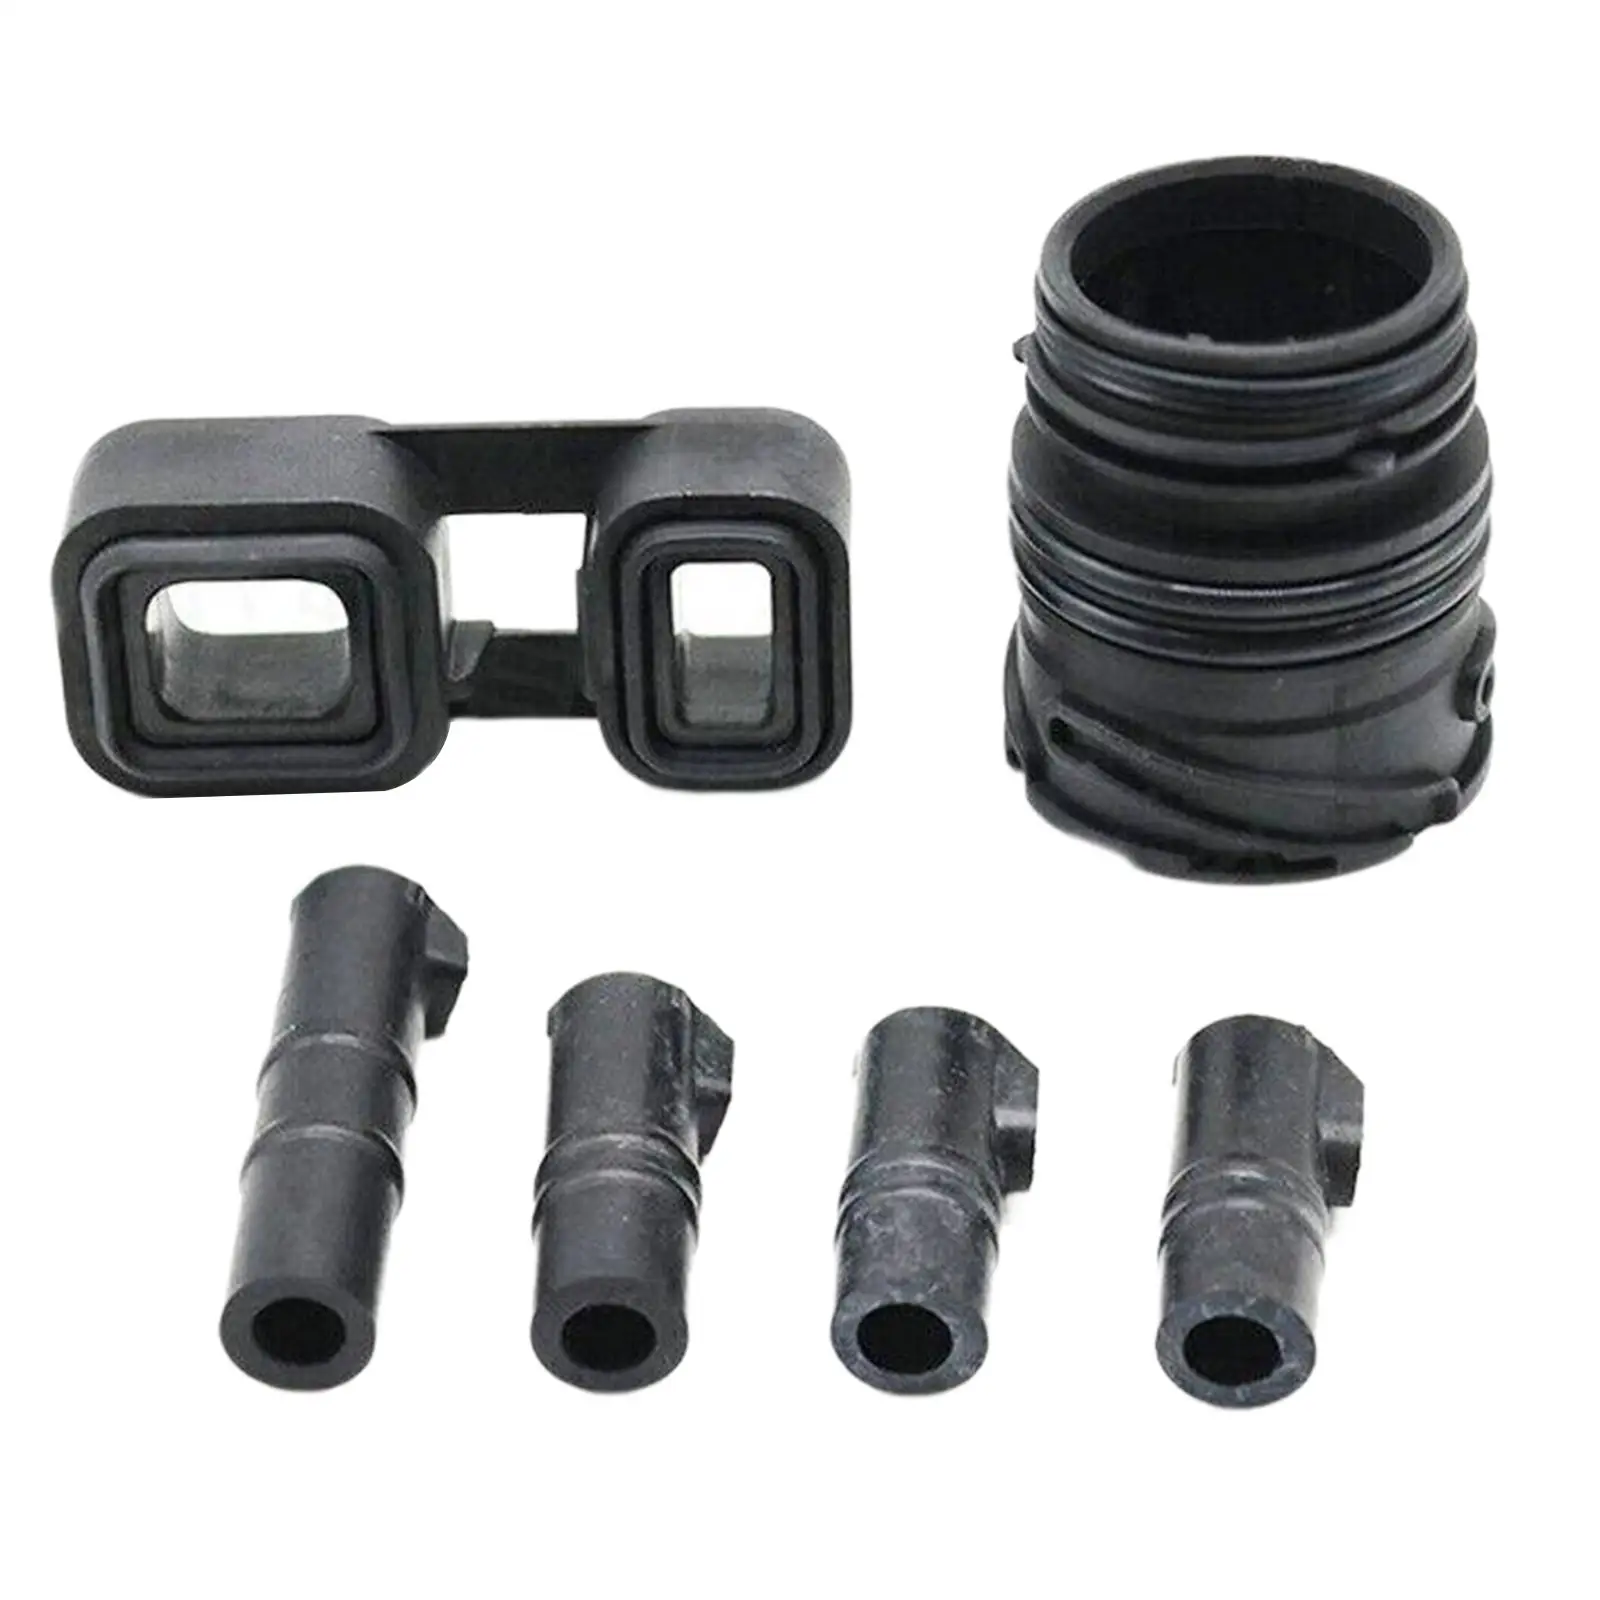 Valve Body Sleeve Connector Seal Kit Car Accessories for BMW 1 Series x1, x3, x5, Z4, Zf Models with 6 Speed Zf 6HP26 6HP28